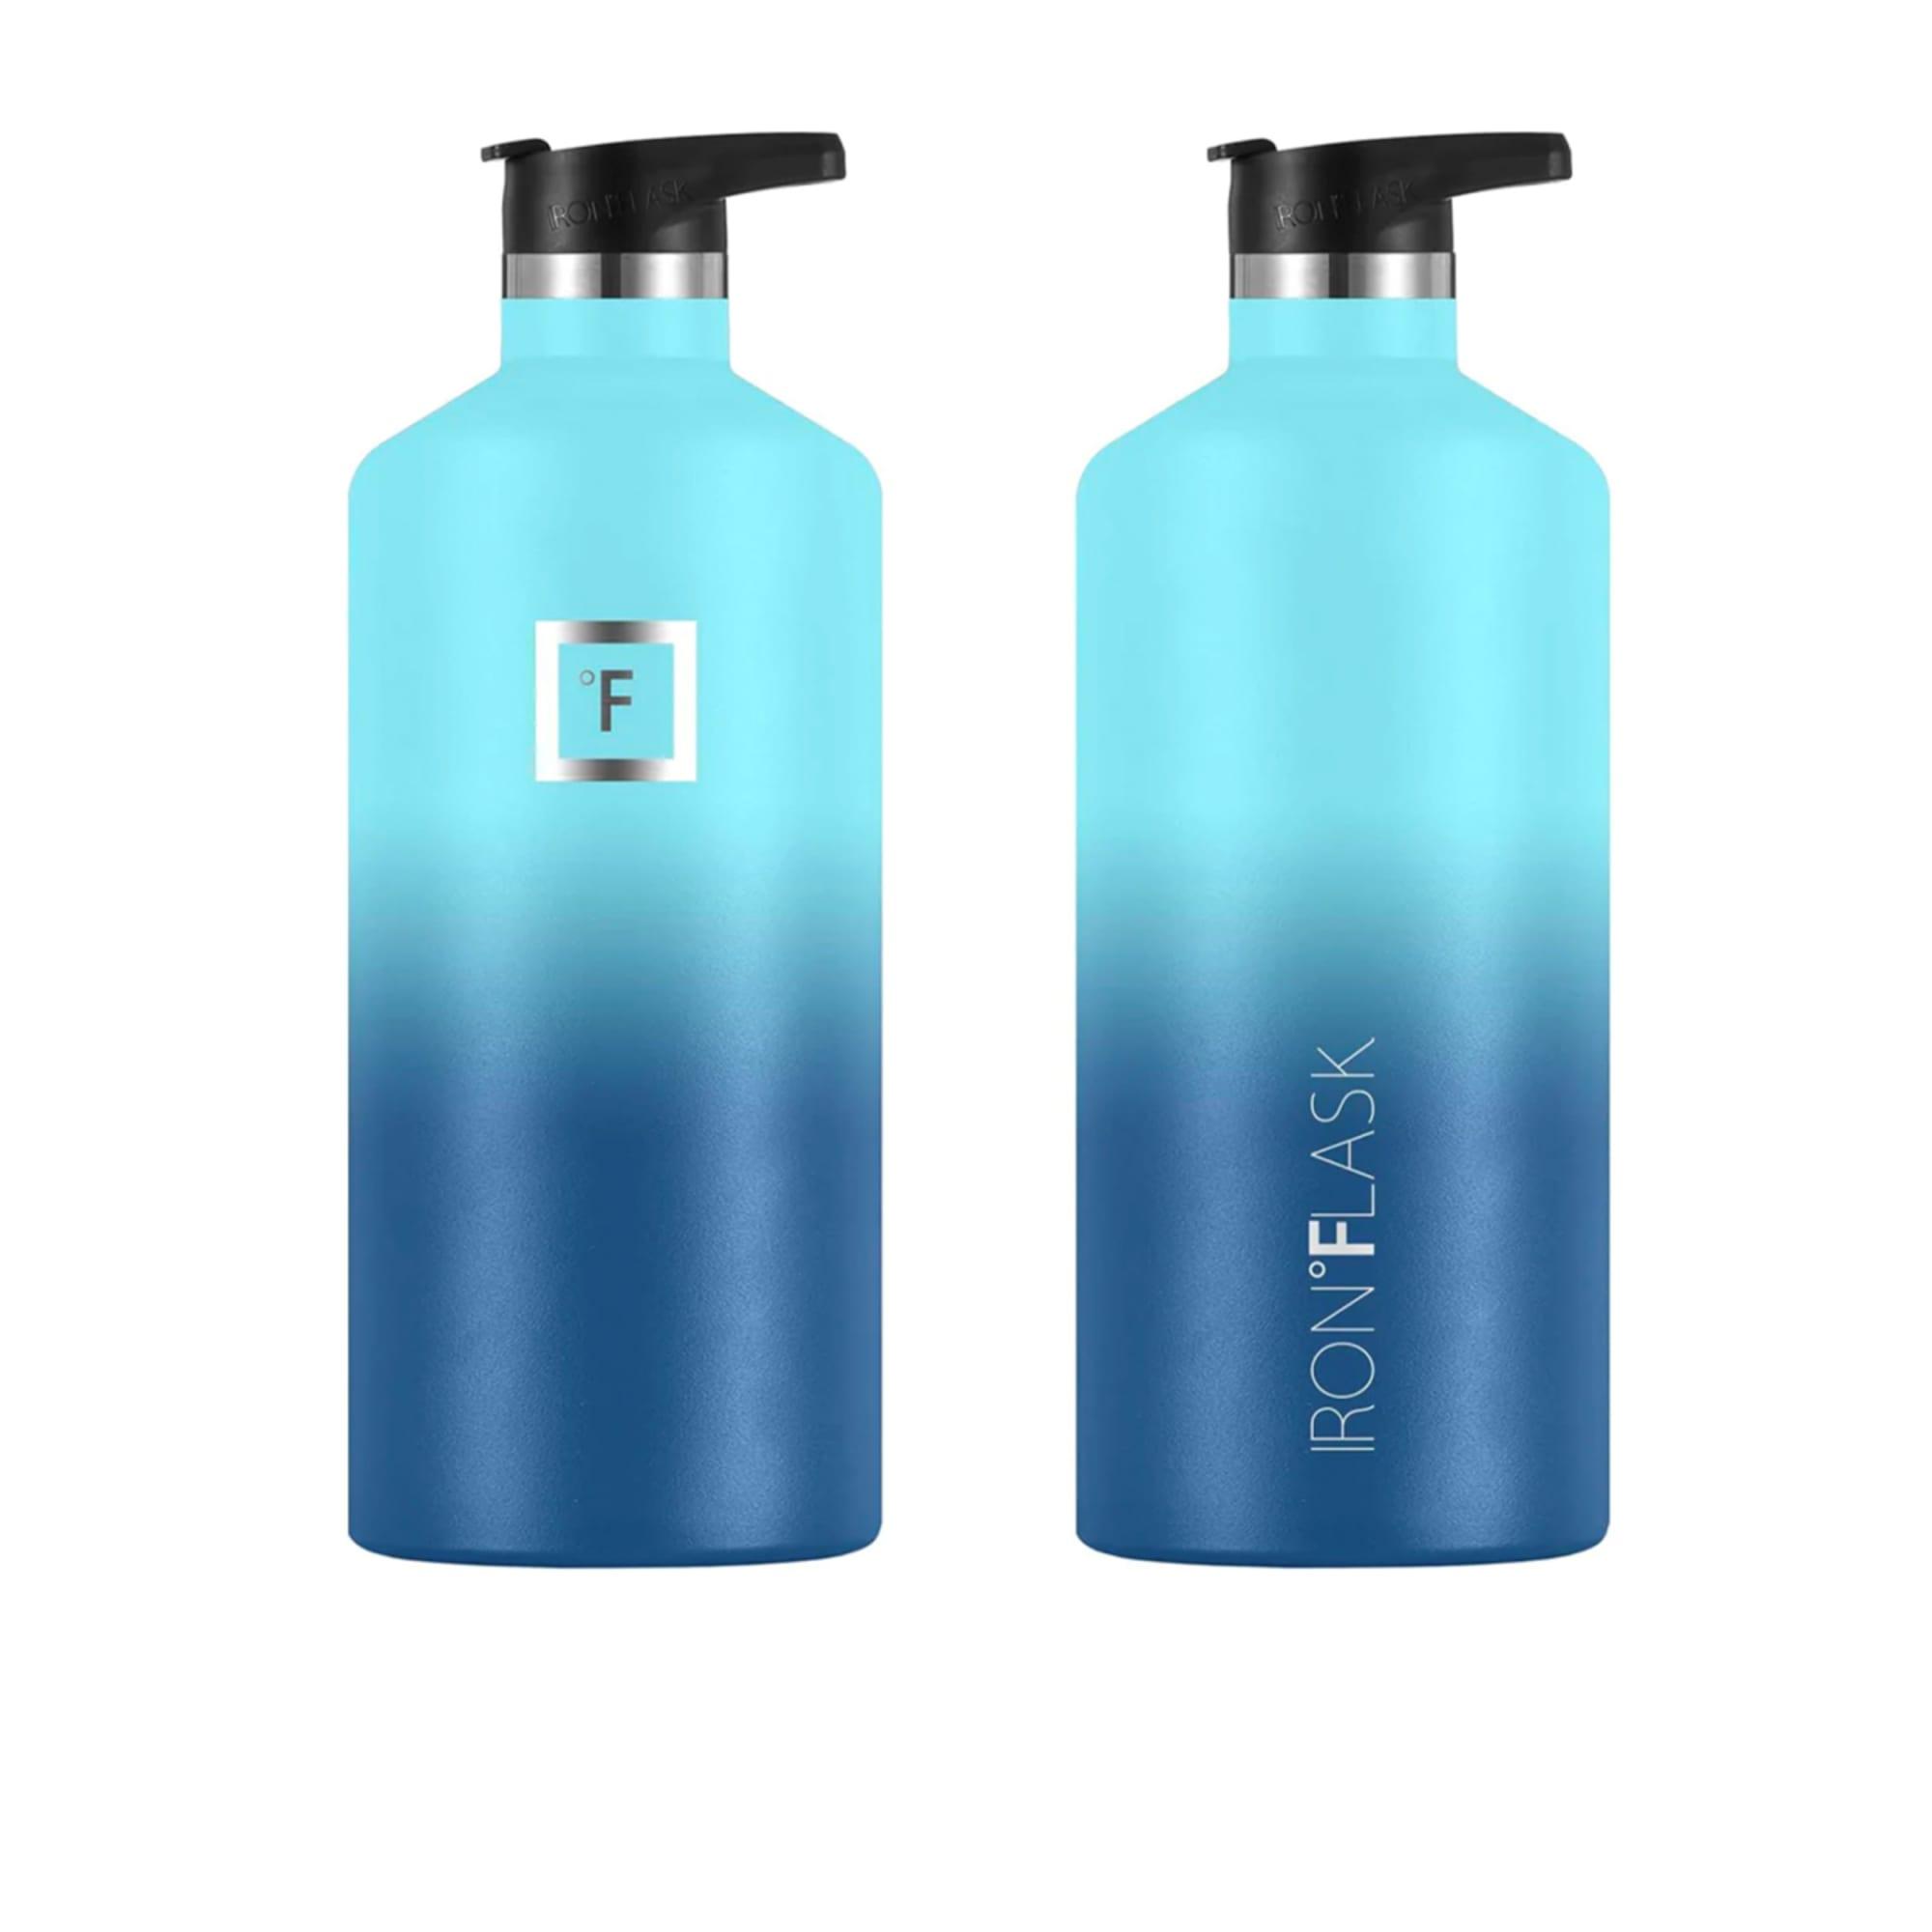 Iron Flask Narrow Mouth Bottle with Spout Lid 1.9L Blue Waves Image 3